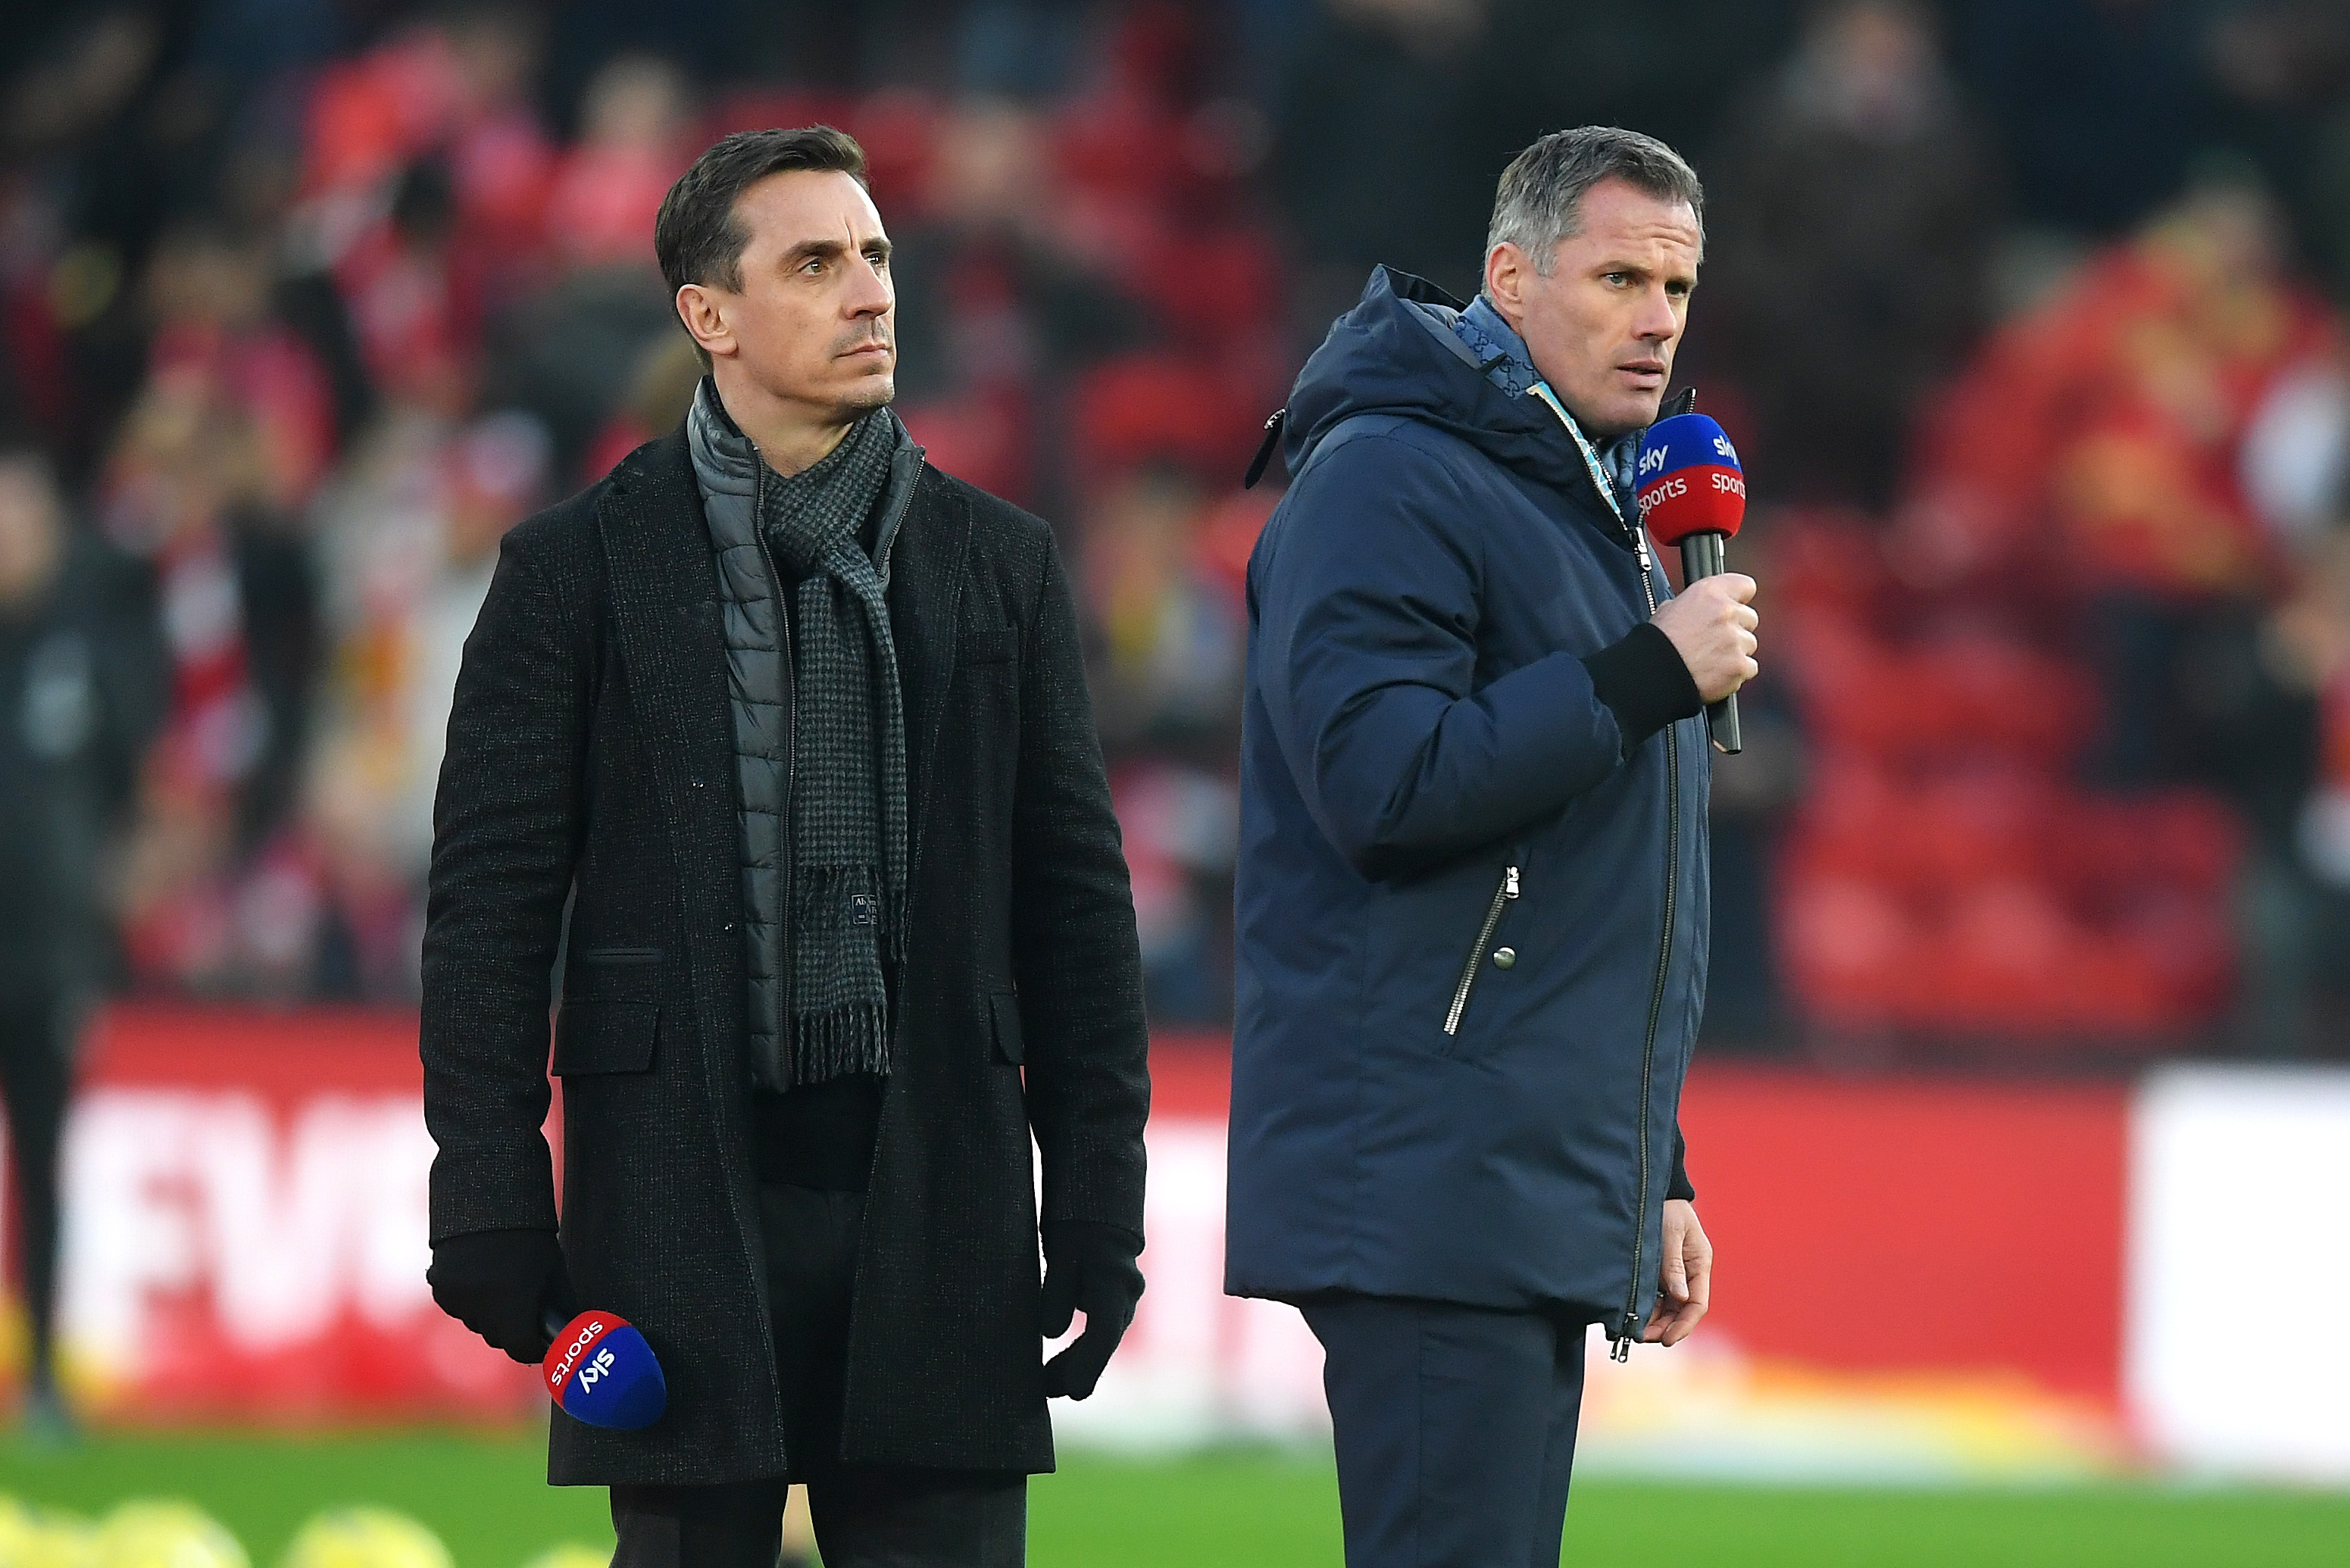 Jamie Carragher weighs in on the pending appointment of Ralf Rangnick as Man Utd interim